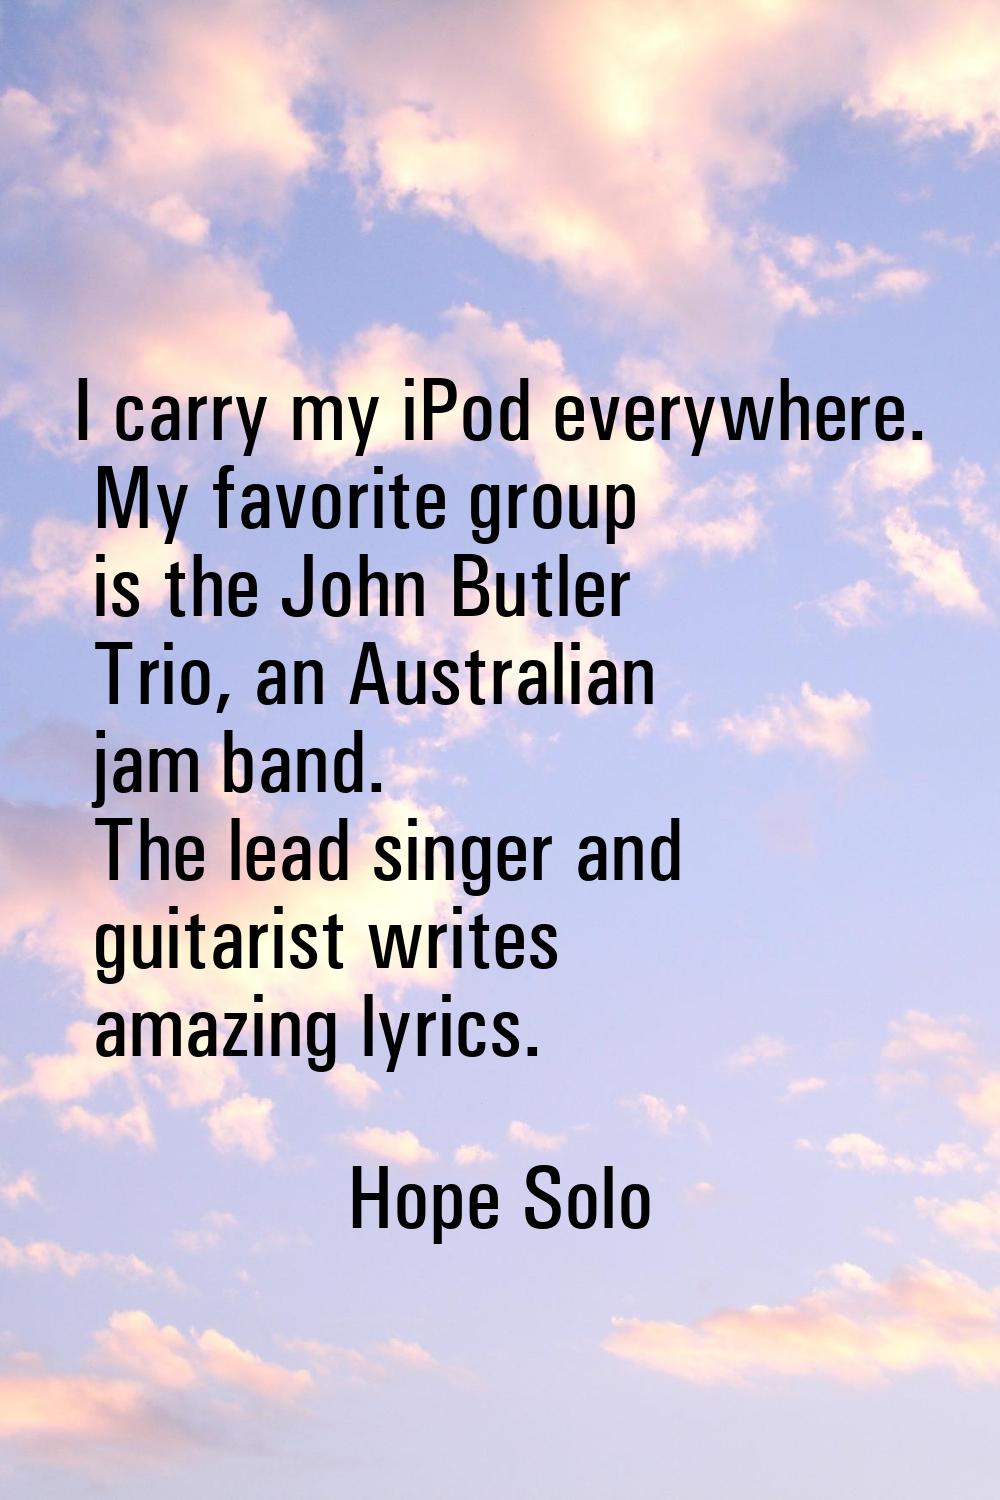 I carry my iPod everywhere. My favorite group is the John Butler Trio, an Australian jam band. The 